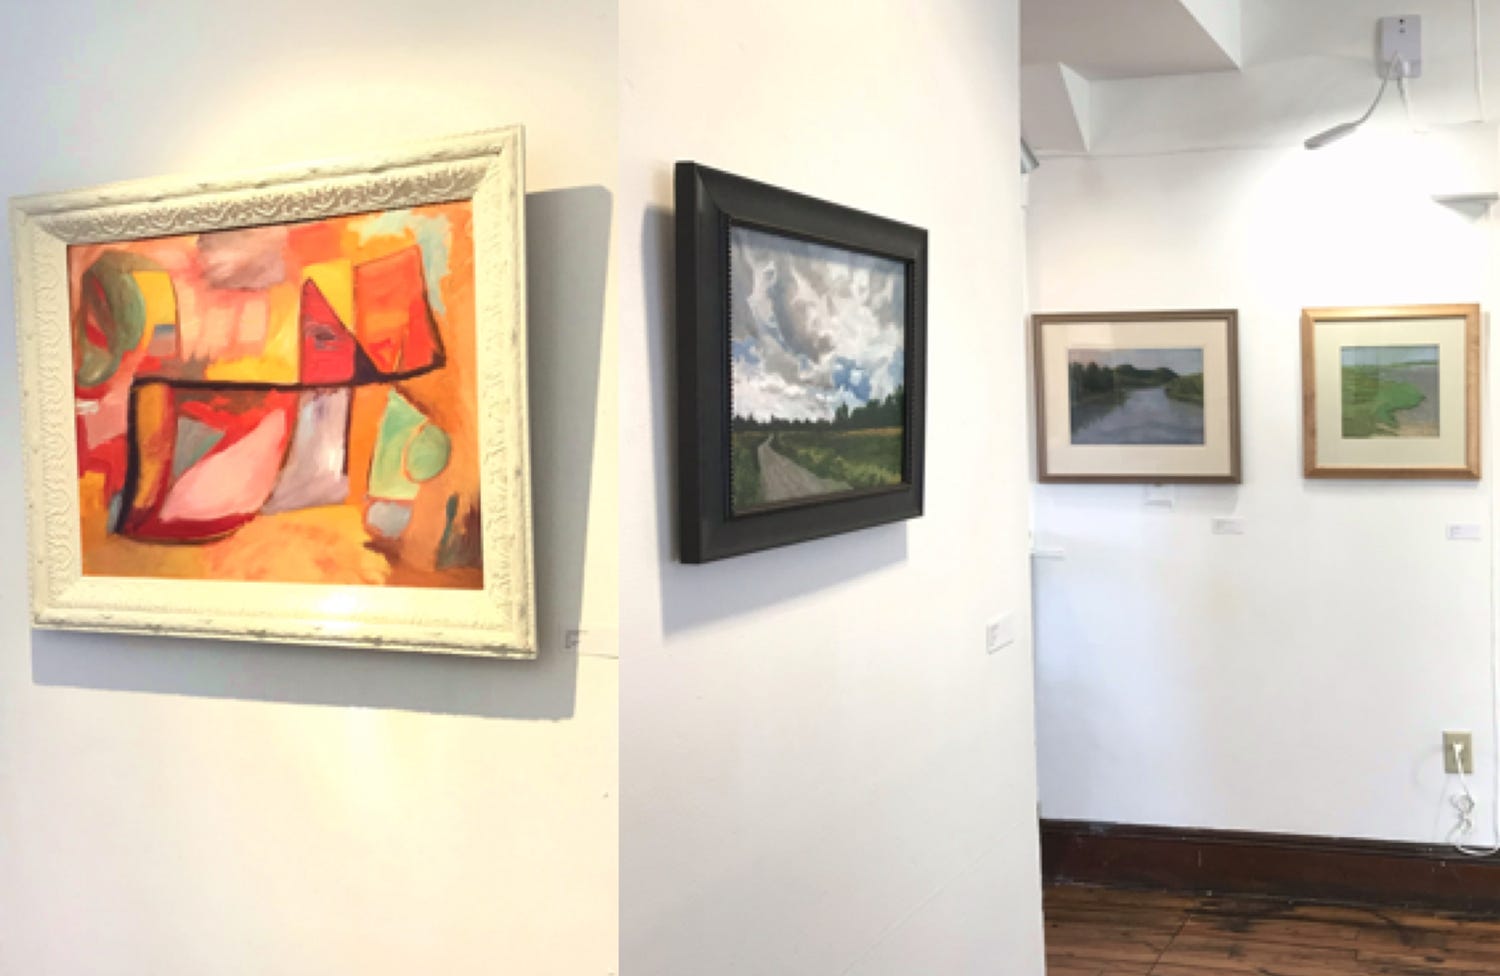 CORINNE GREENHALGH Recent Oil Paintings MARCIE MAYNARD Oils Pastels and Monotypes